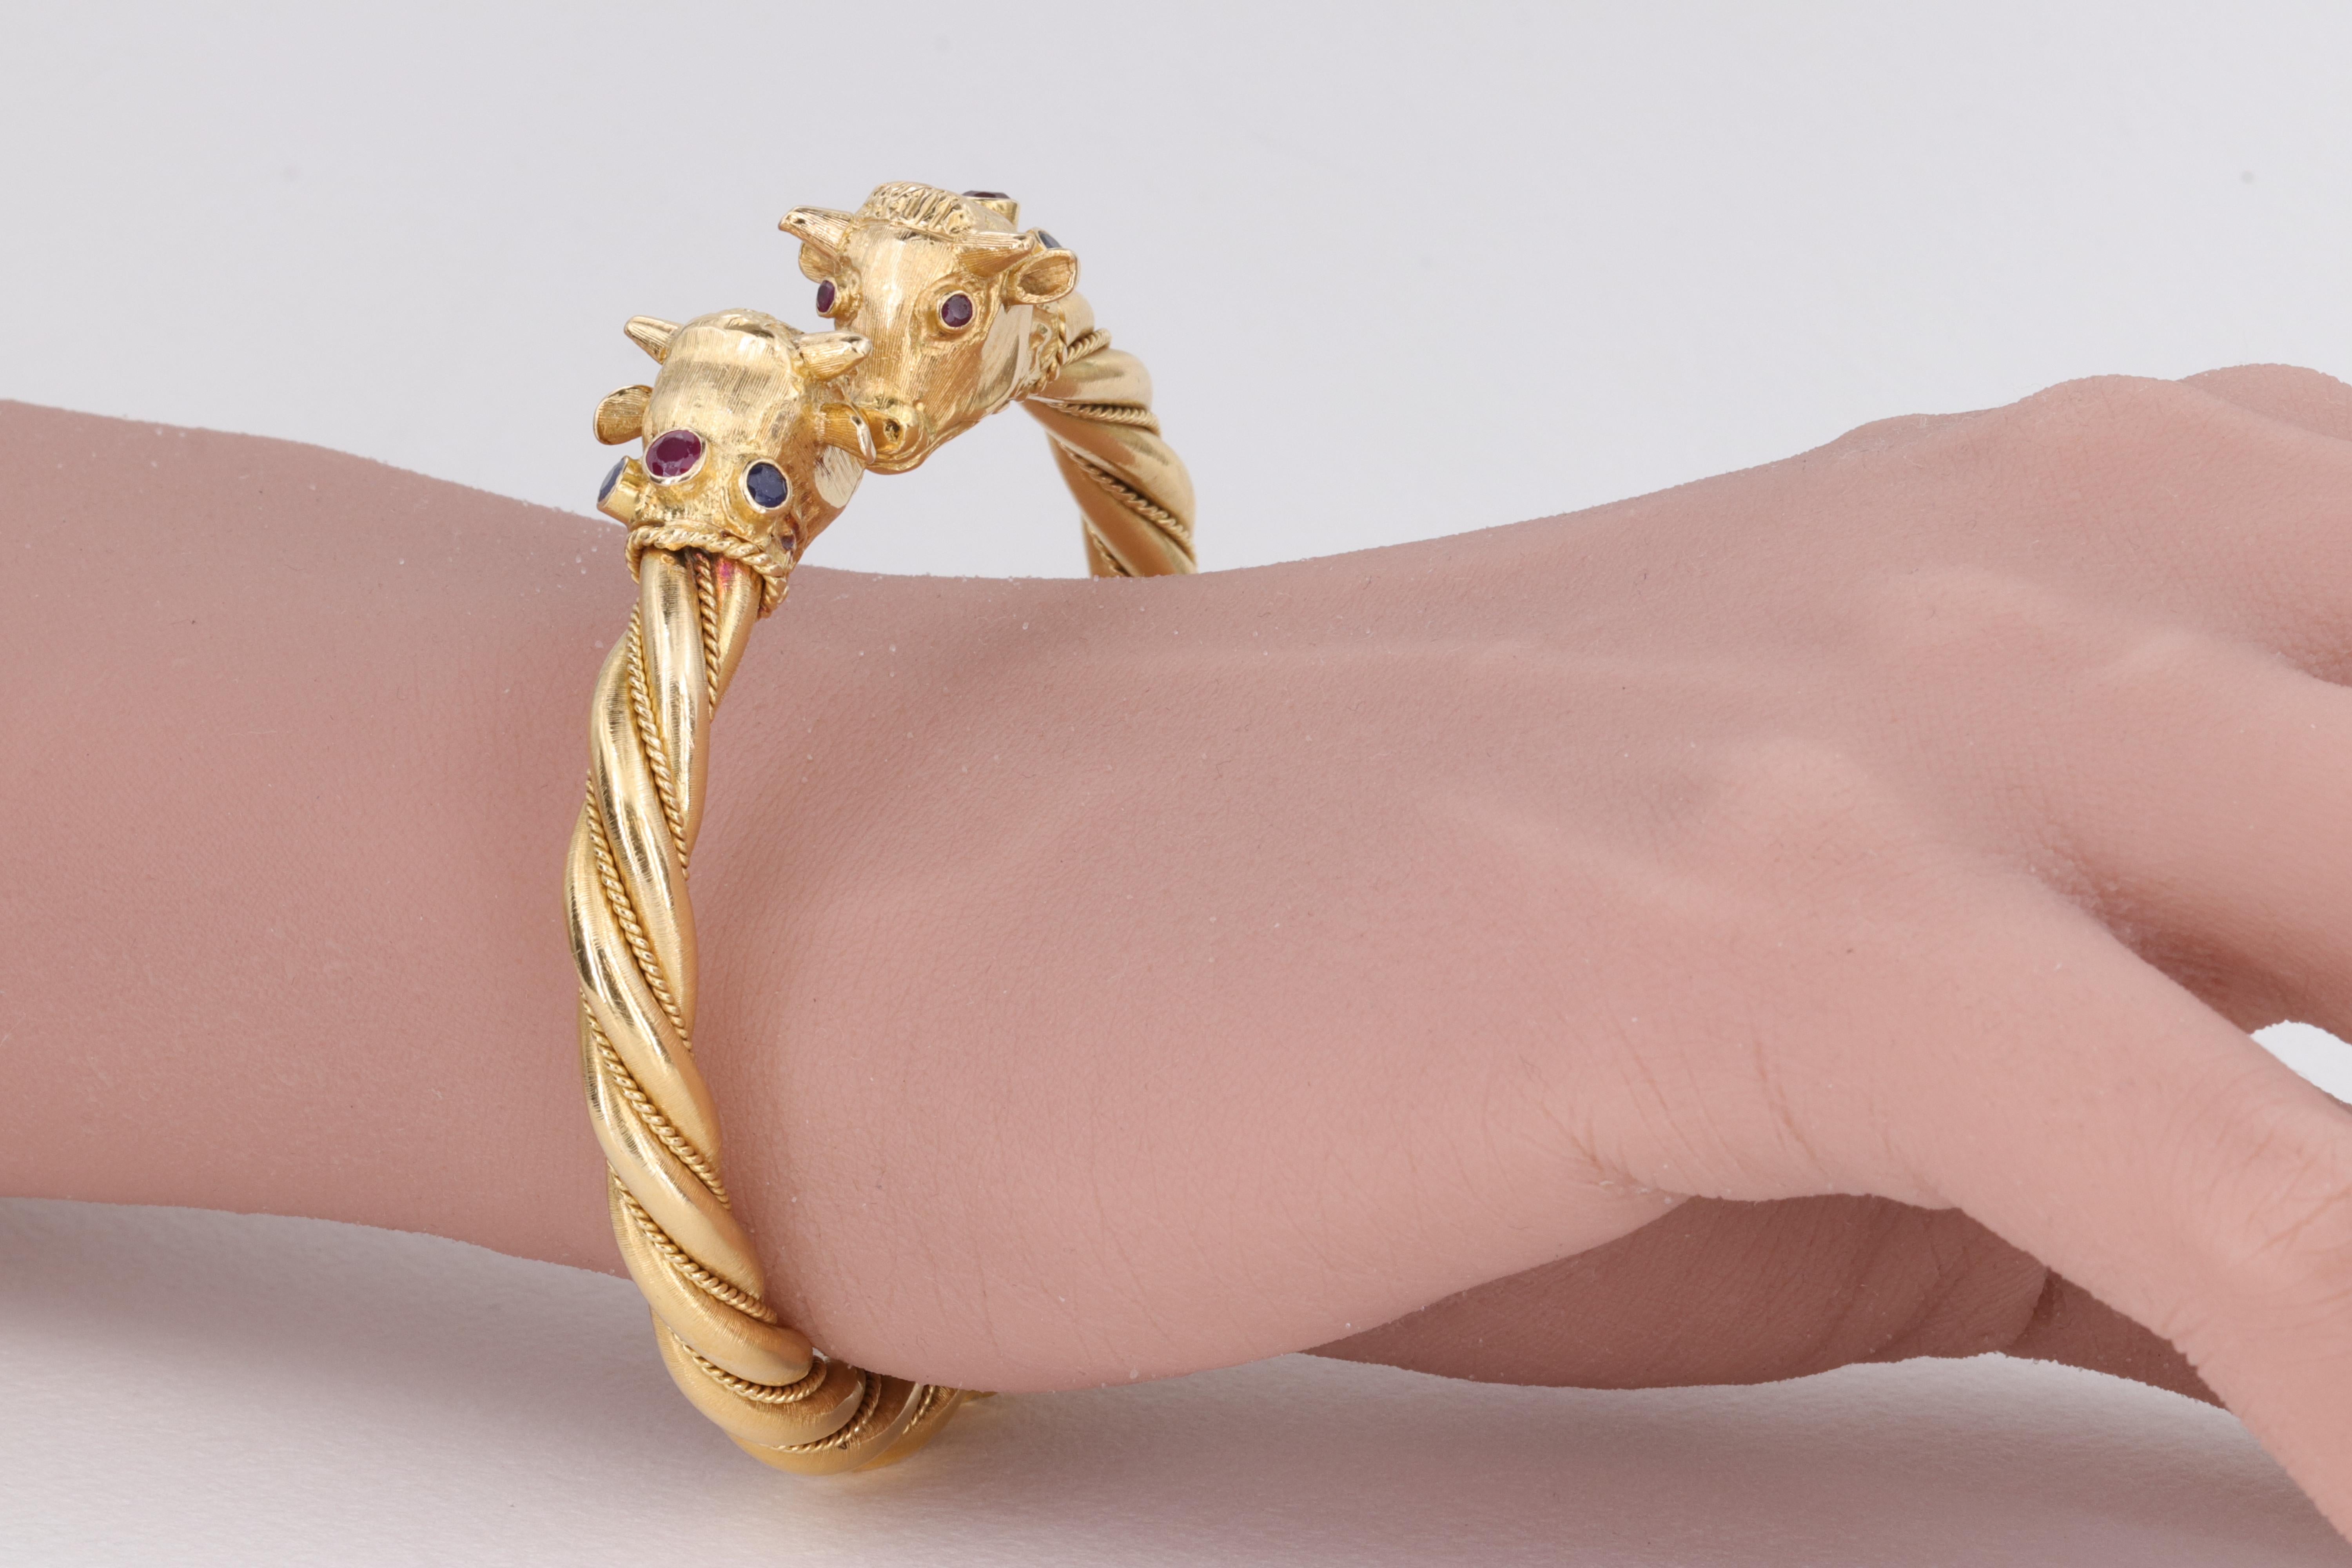 An extremely well made bangle bracelet by iconic Greek jewelry designer Ilias Lalaounis, this bangle depicts 2 Bulls heads atop a textured and twisted 18 karat yellow gold hinged bangle. The bulls are adorned with vivid red ruby eyes, and sapphire &